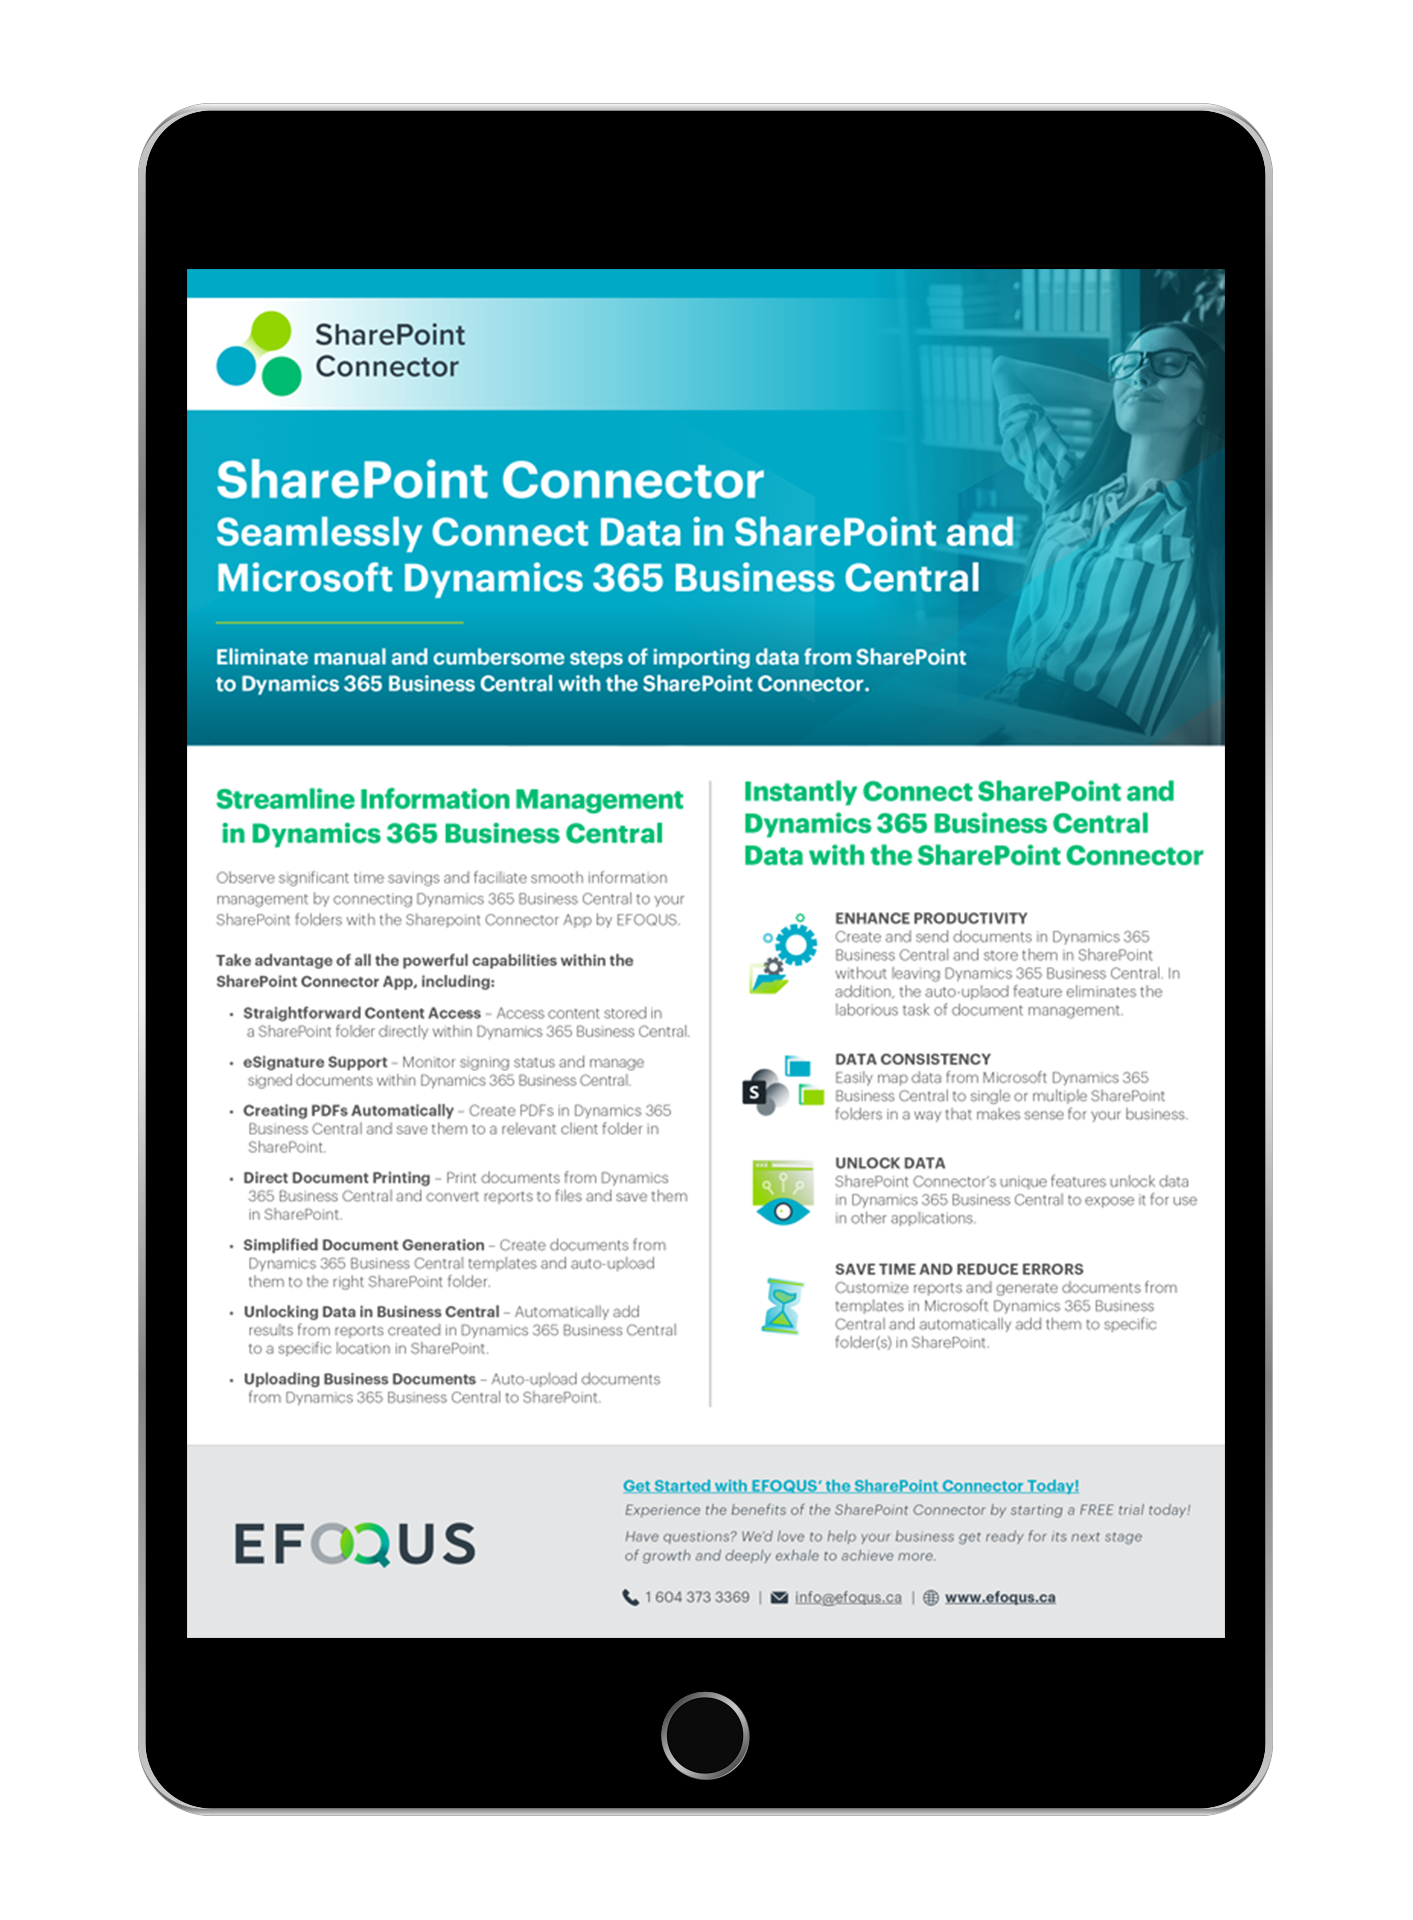 EFOQUS - sharepoint connector - microsoft dynamics 365 business central